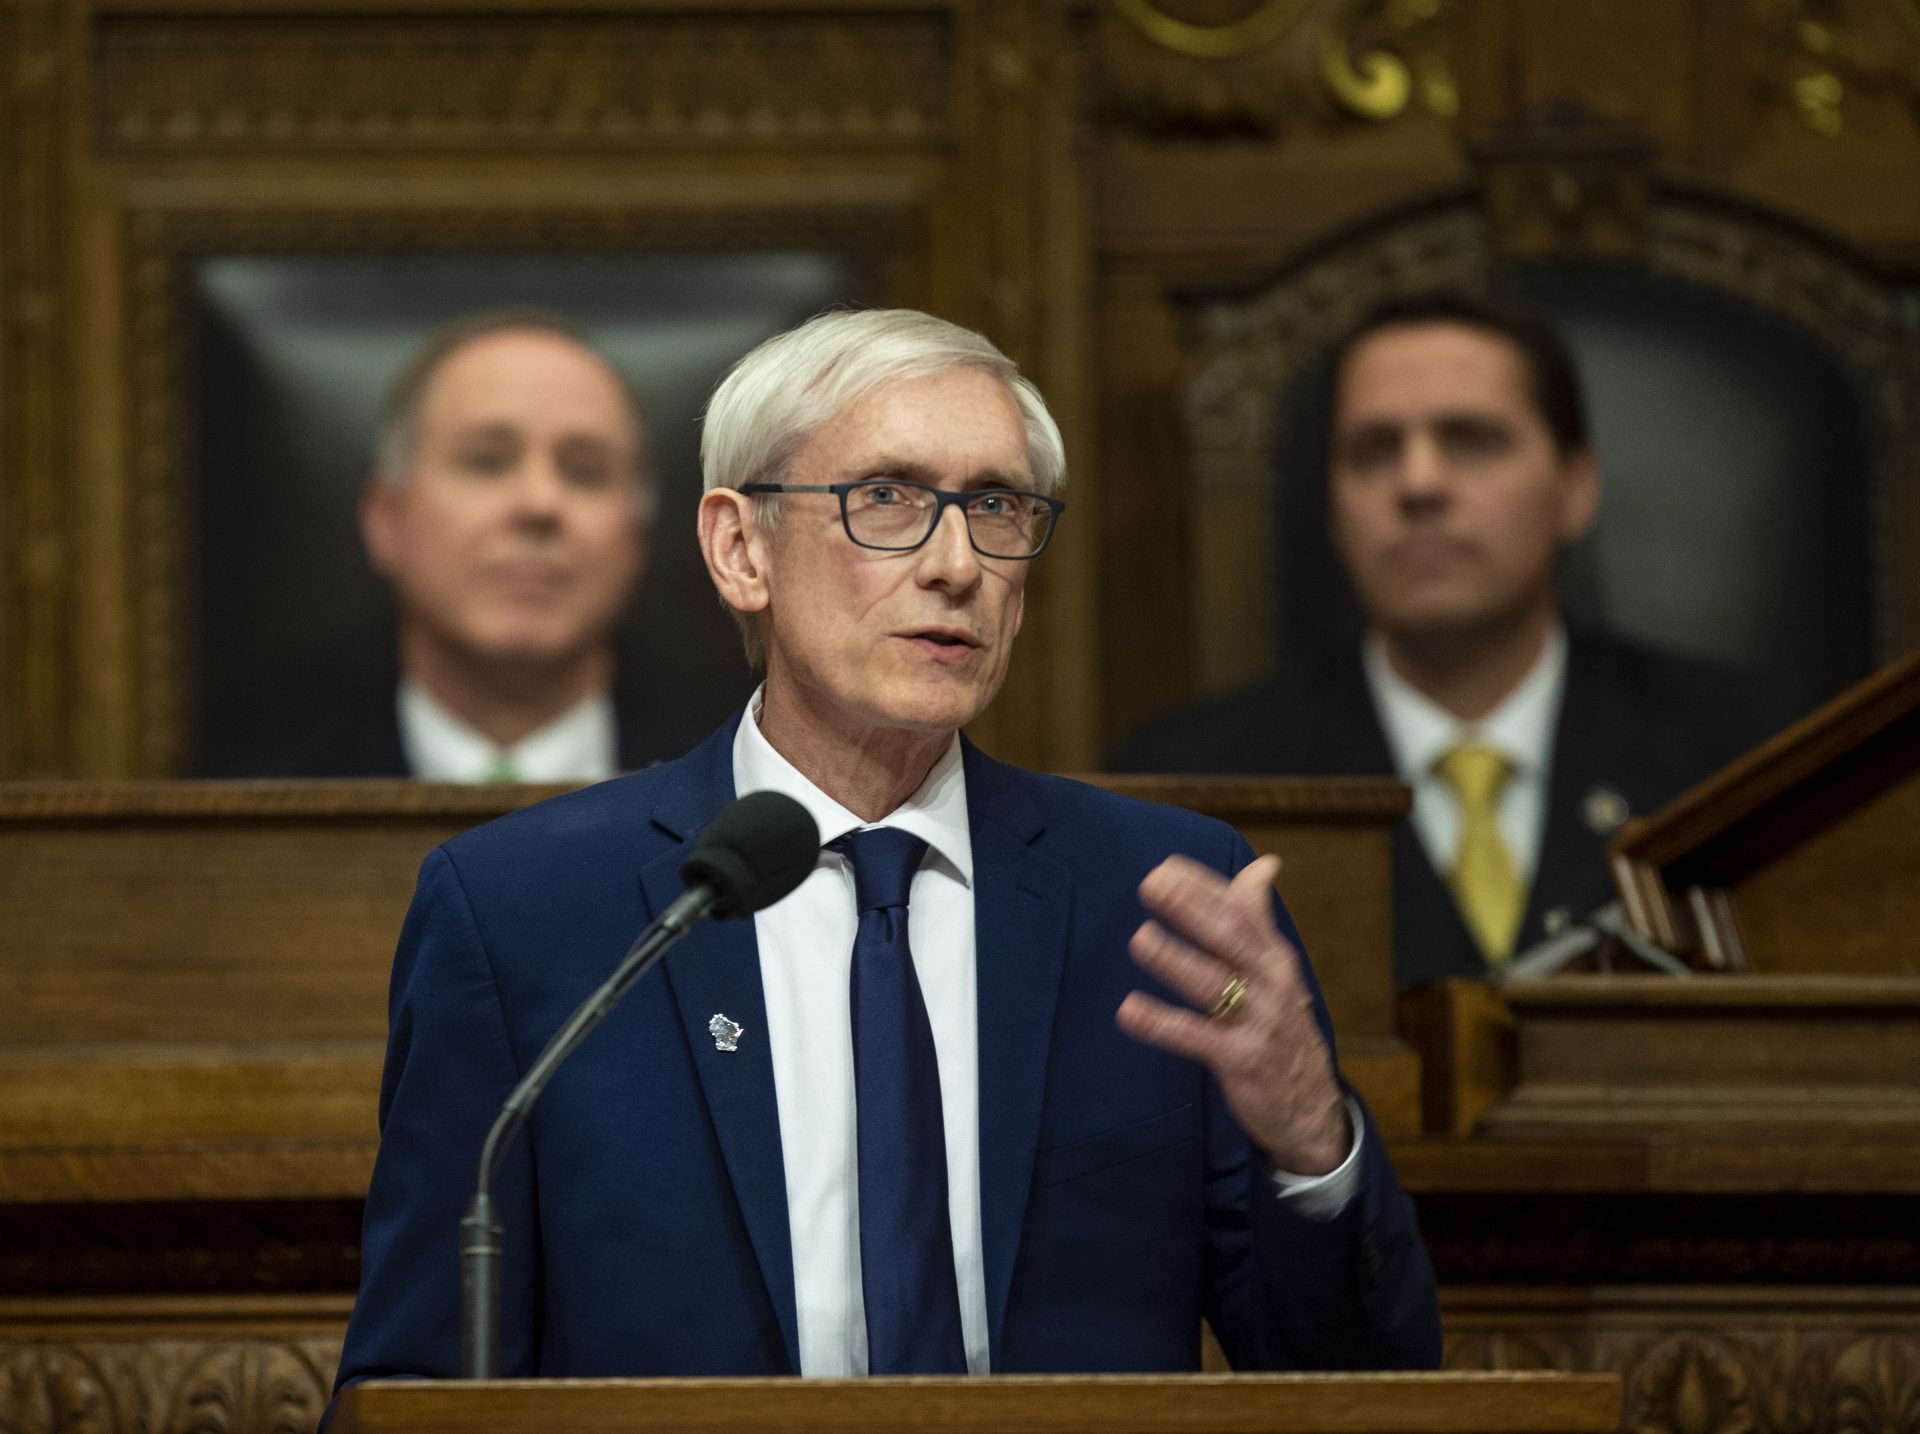 FILE PHOTO: In this Jan. 22, 2019 file photo, Wisconsin Gov. Tony Evers addresses a joint session of the Legislature in the Assembly chambers during the Governor's State of the State speech at the state Capitol, in Madison, Wis. Behind Evers is Assembly Speaker Robin Vos, R-Rochester, left, and Senate President Roger Roth, R-Appleton. Evers tried for months for the Legislature to take up gun control bills to no avail. So he recently called a special session to force them to convene on the issue.